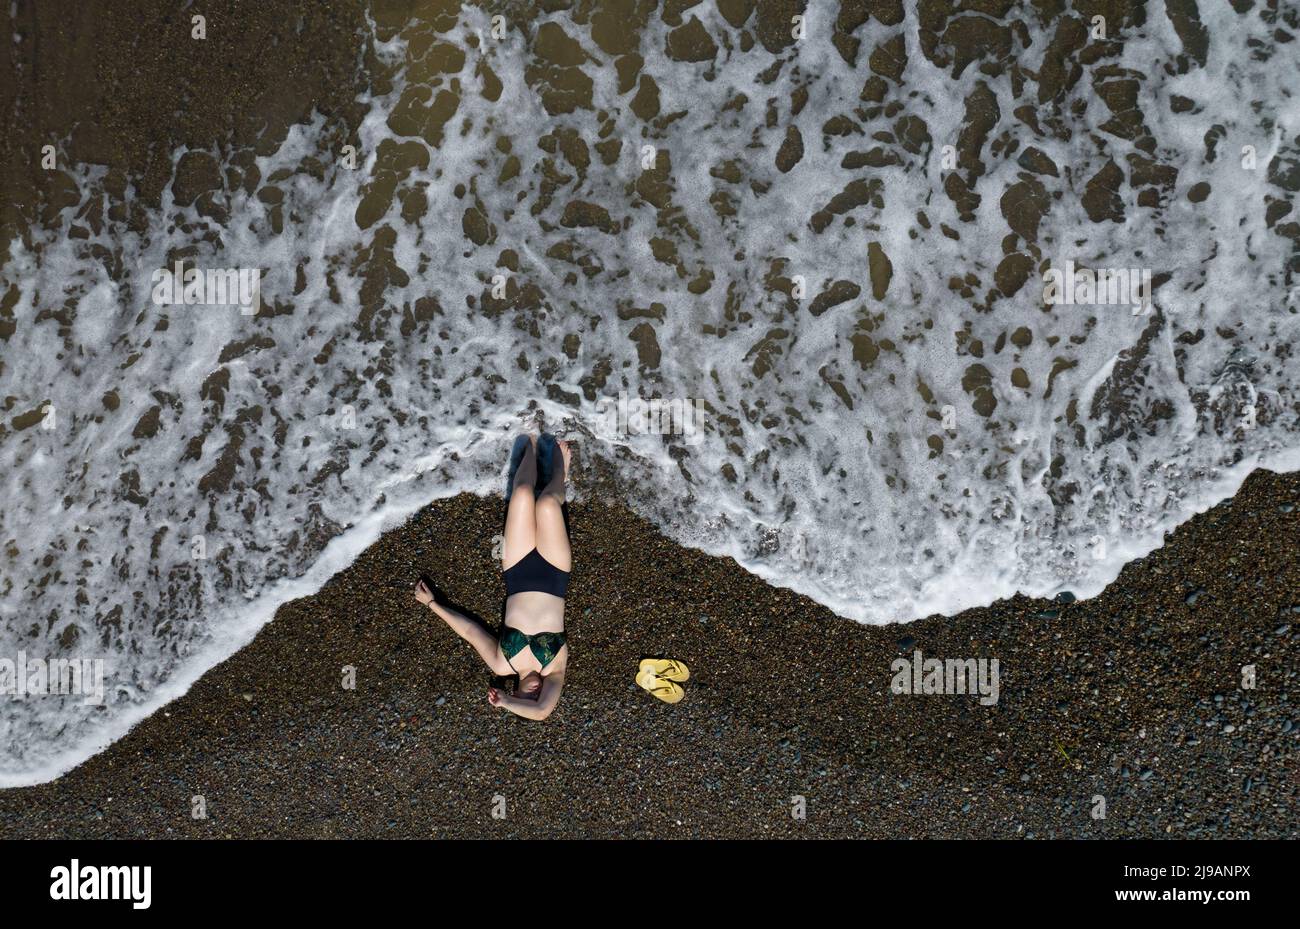 Woman with swimsuit relaxing on a sandy beach with sea waves crashing on the shore. Overhead shot. Aerial drone photograph Stock Photo